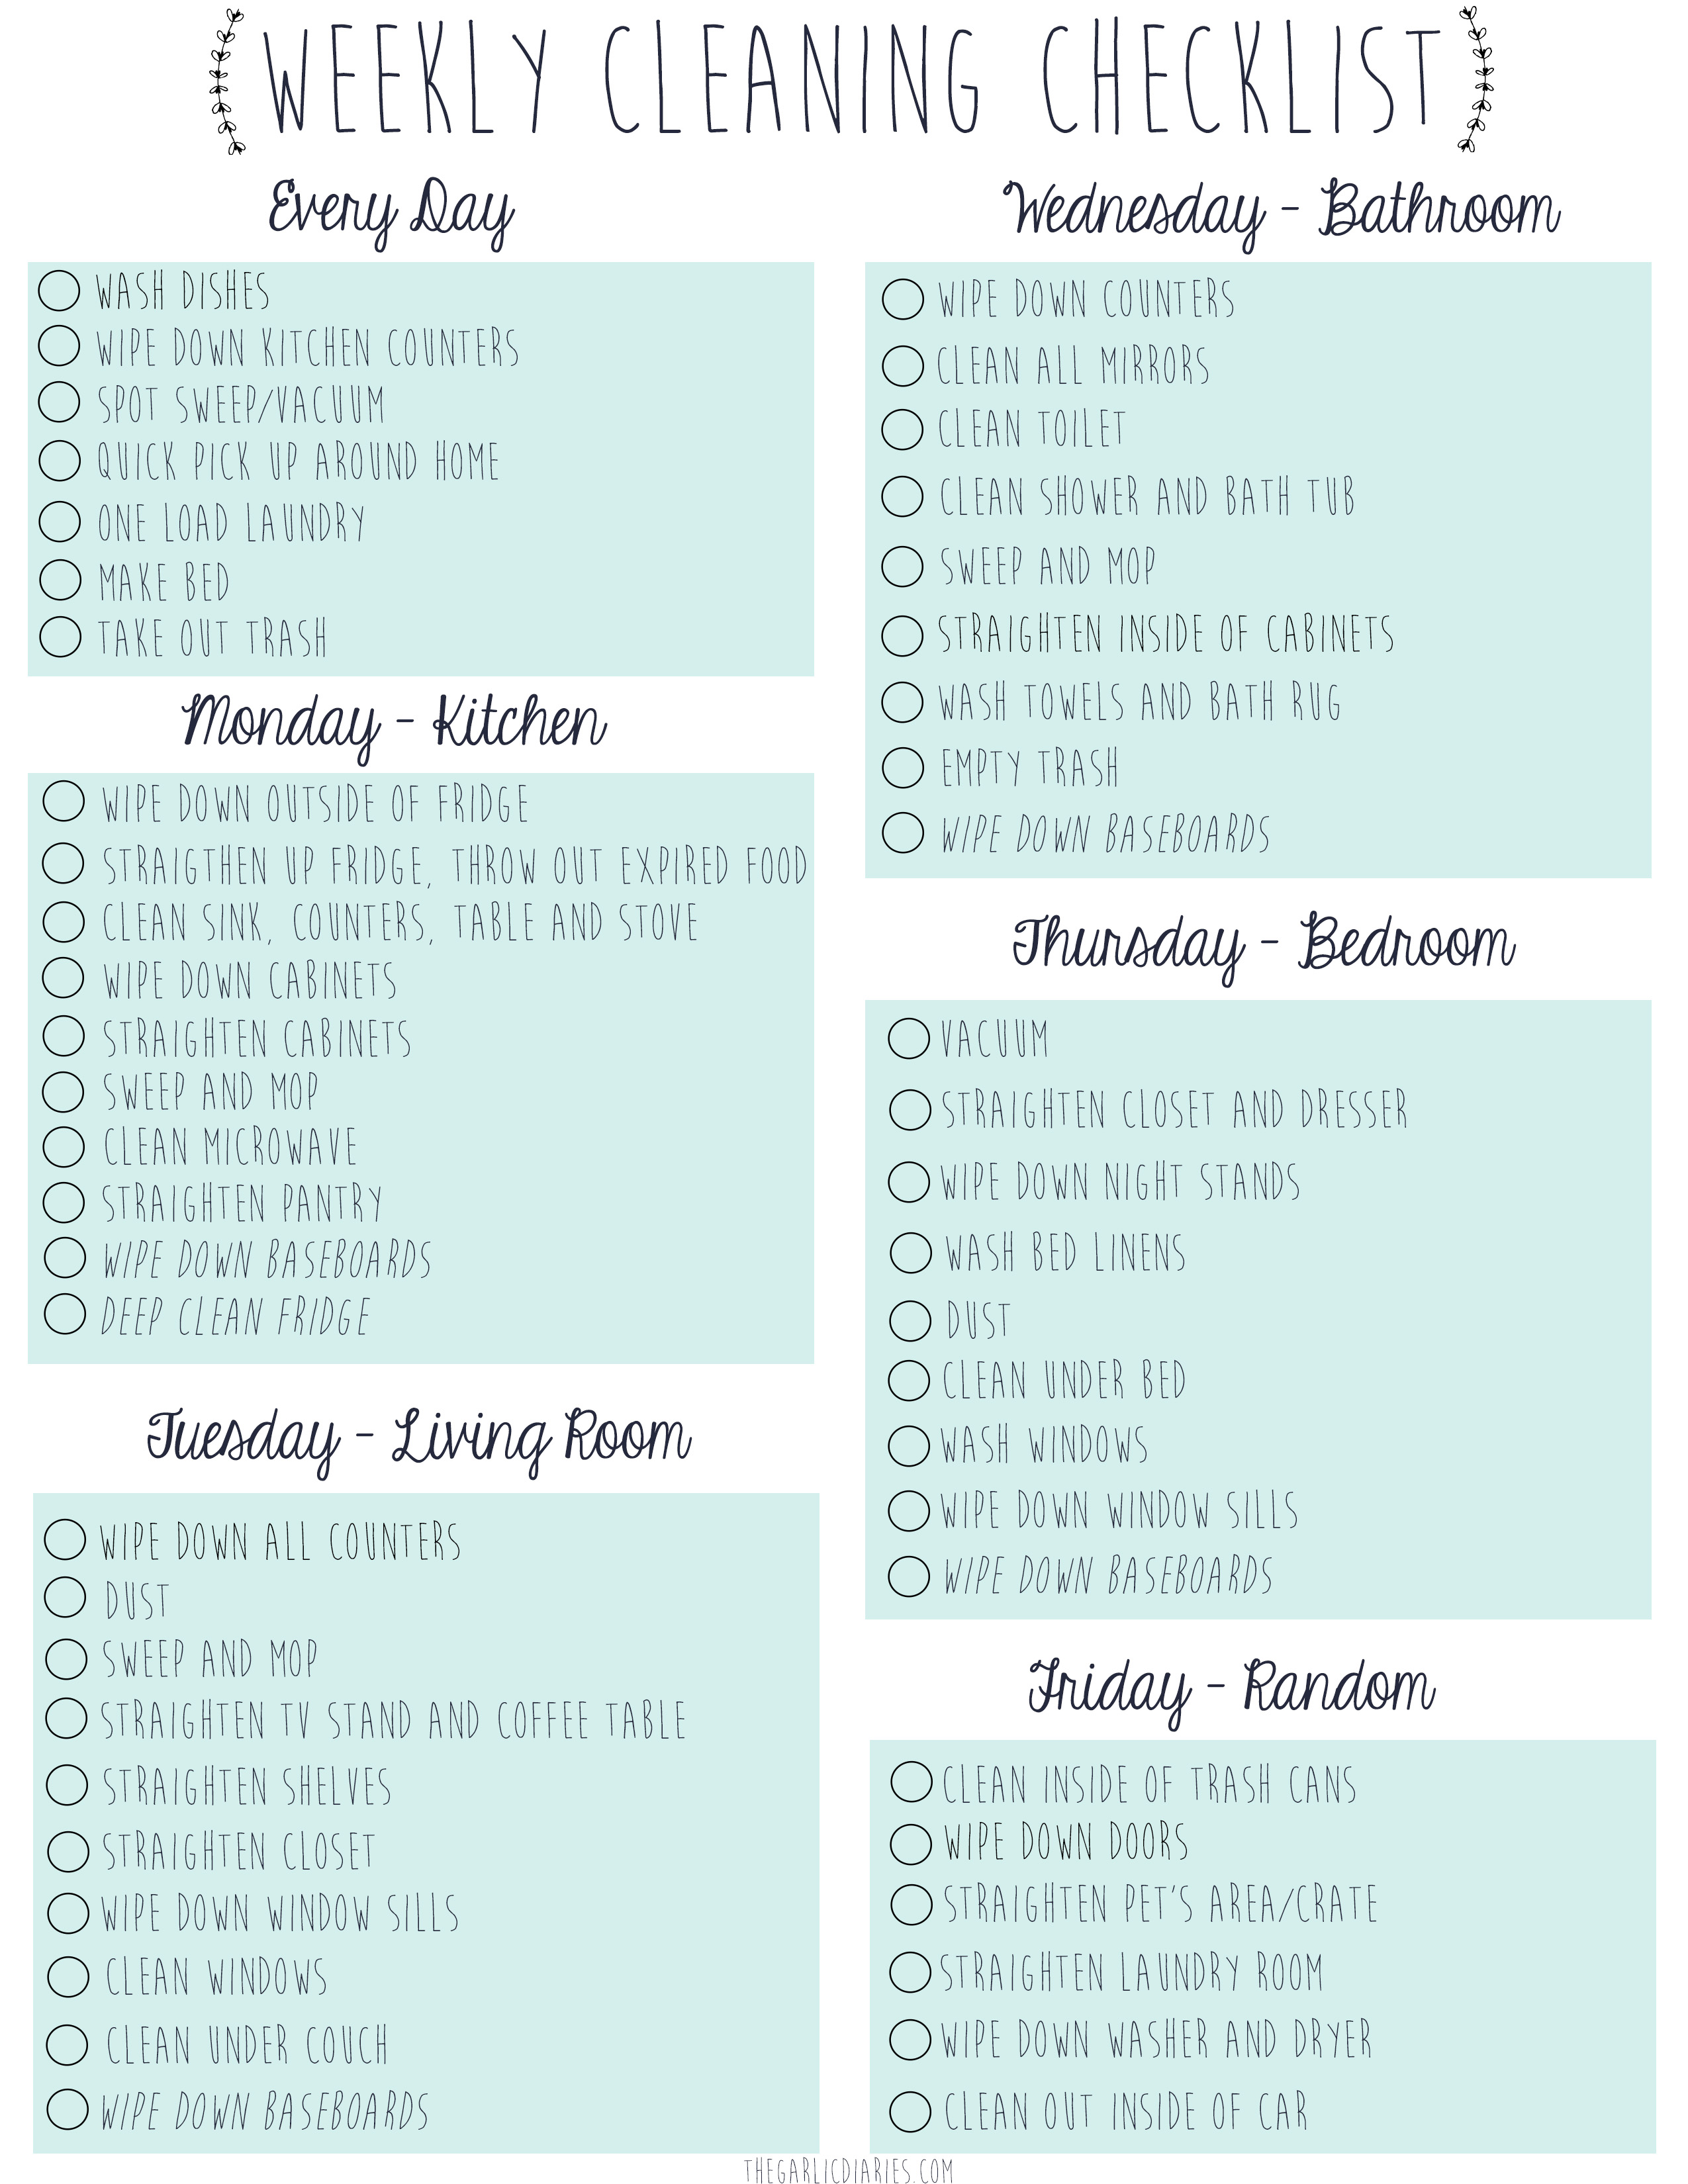 Weekly Cleaning Checklist (with free downloadable)